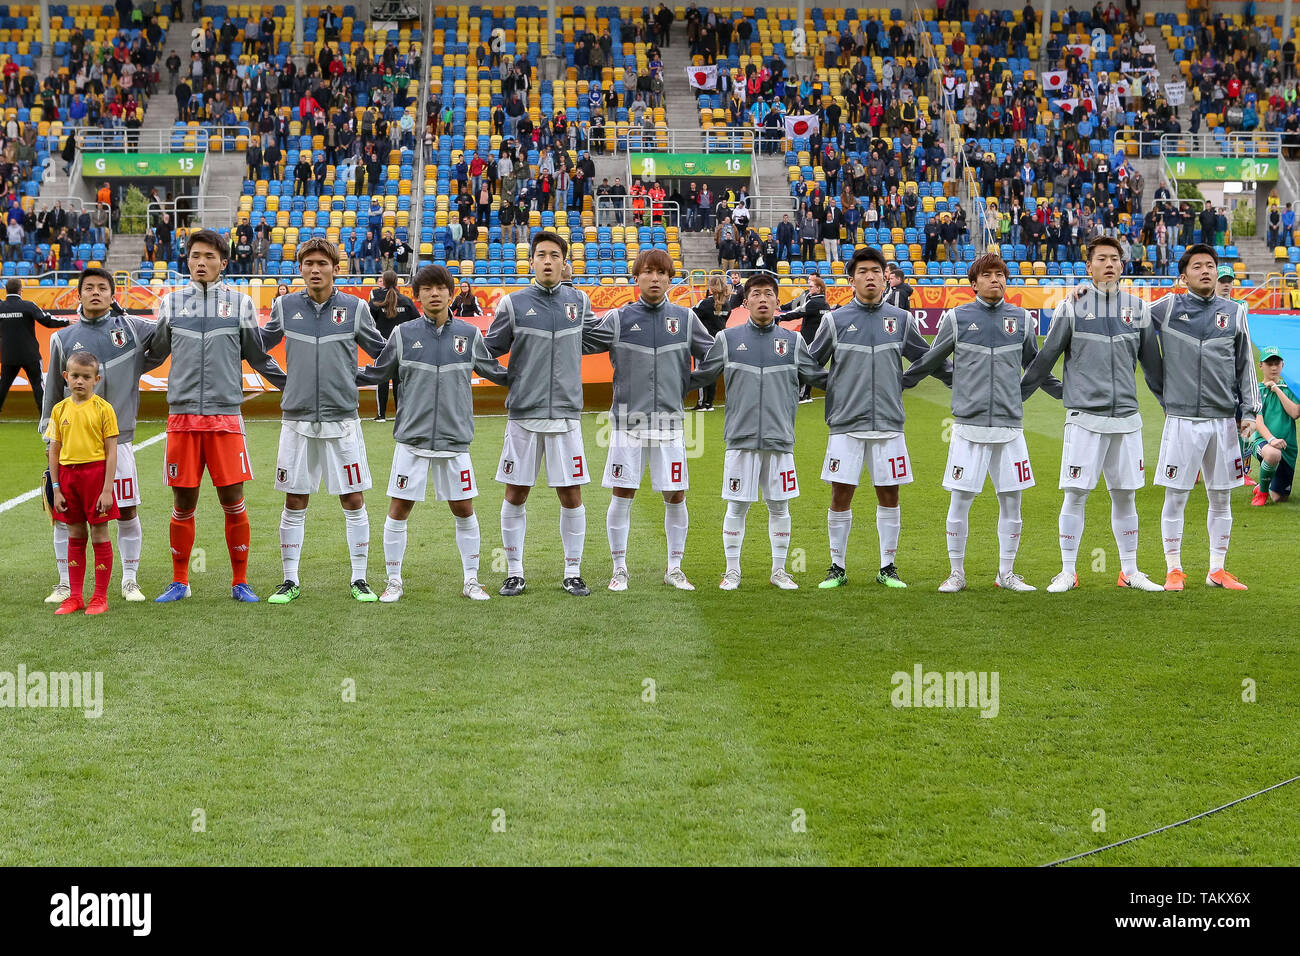 Gdynia Stadium, Gdynia, Poland - 26th May, 2019: National team of Japan  seen during teams presentation before FIFA U-20 World Cup match between  Mexico and Japan (GROUP B) in Gdynia. (Final score;